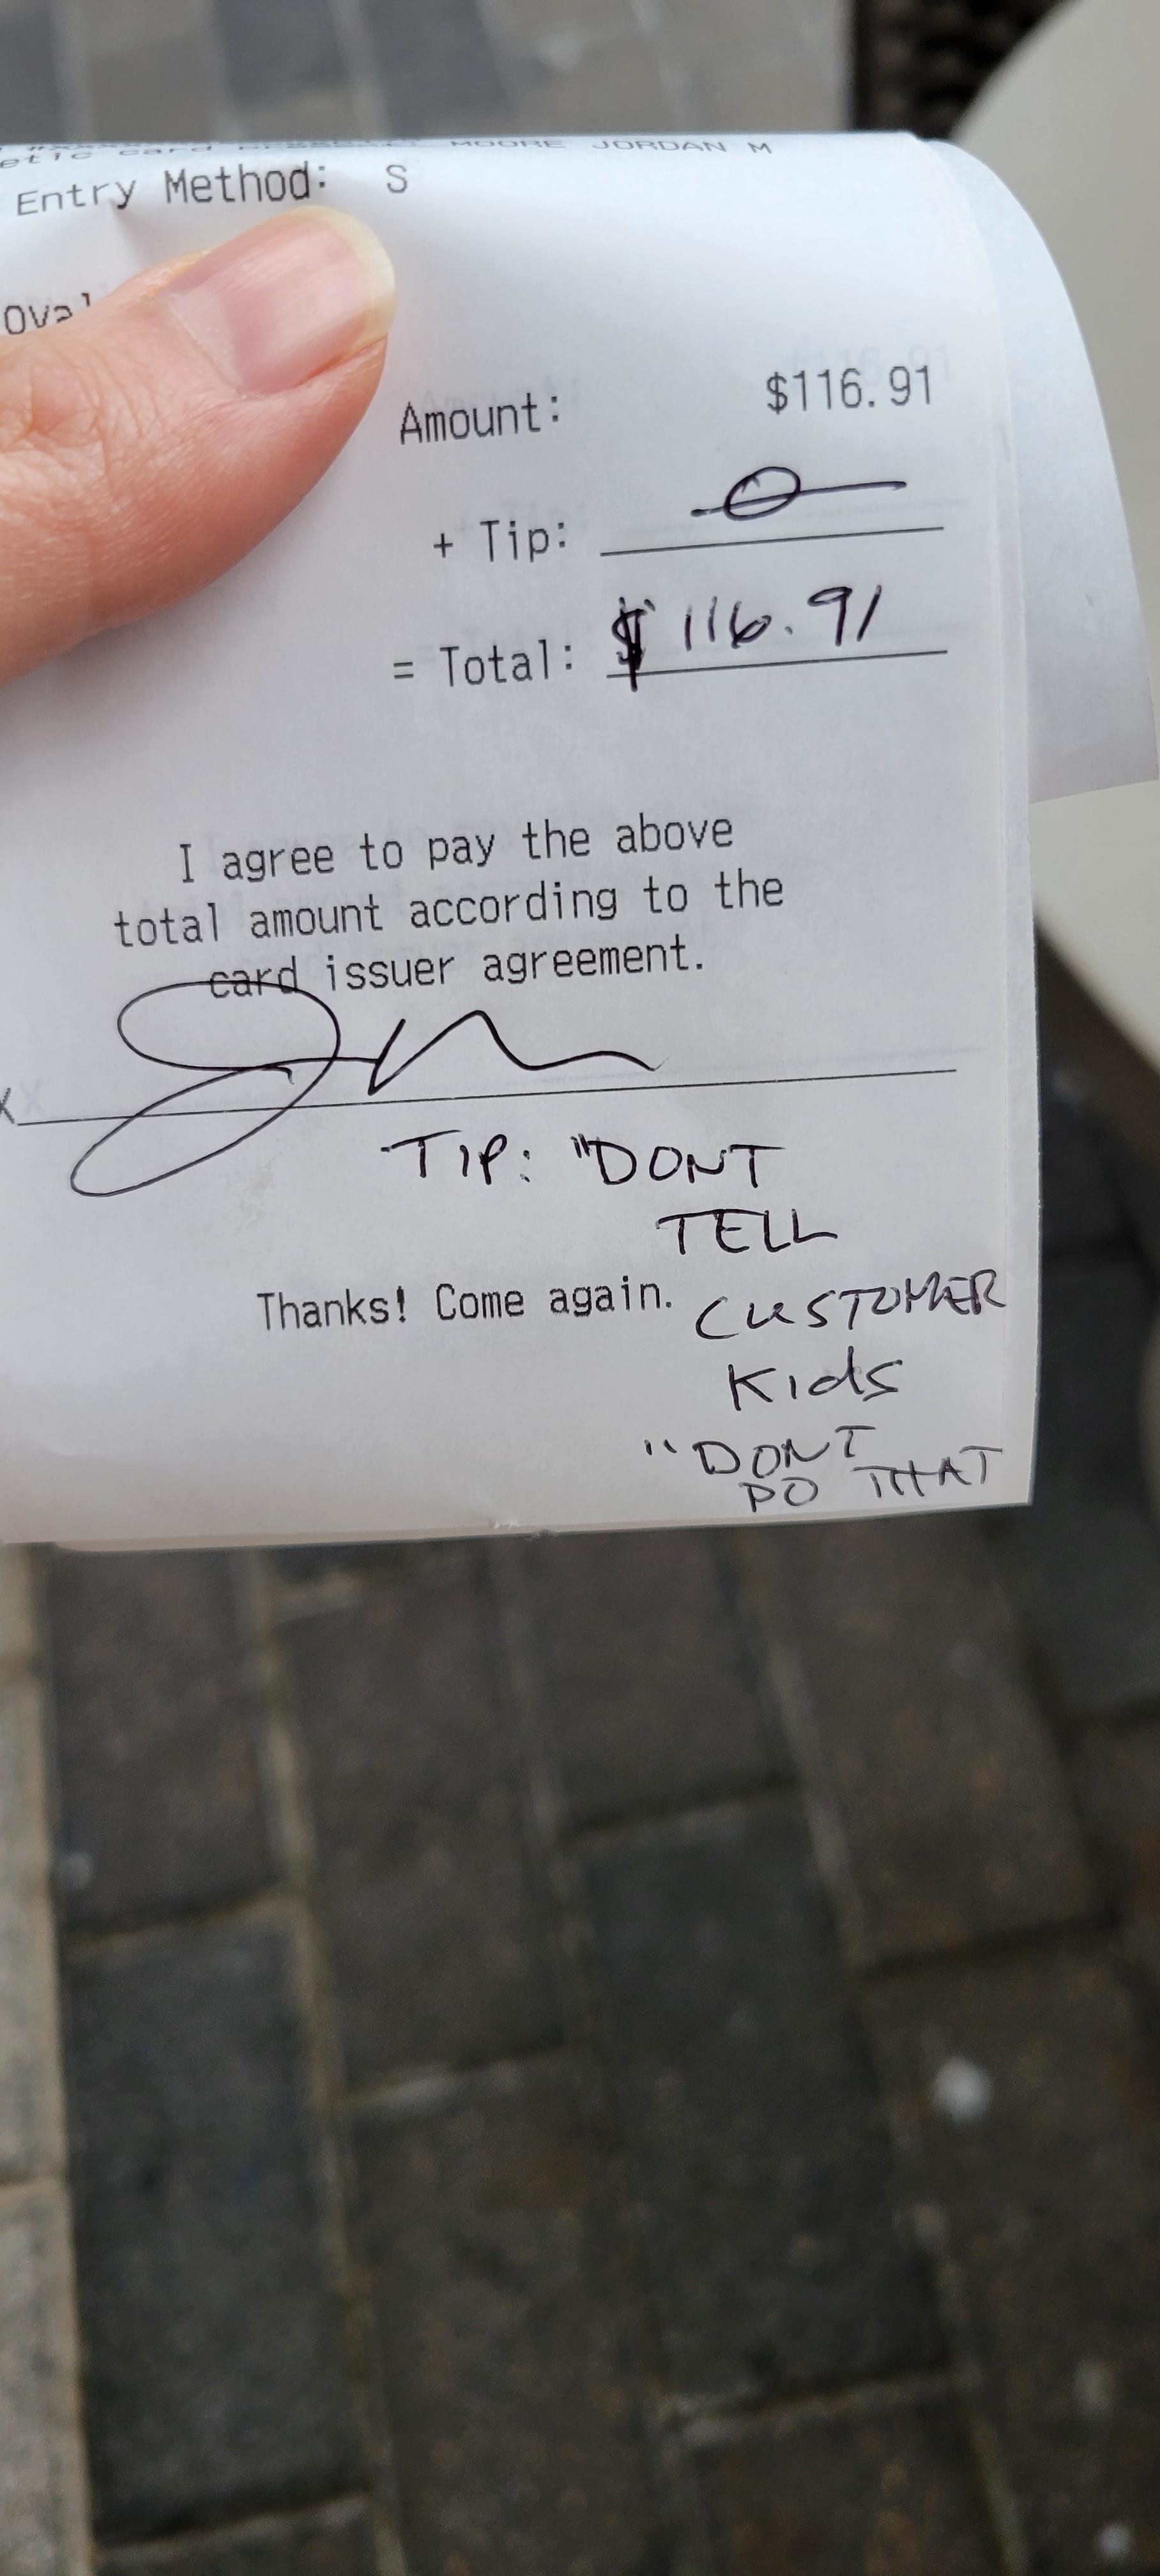 Receipt with $0 tip making total $116.91 with a note saying &quot;Tip: Don&#x27;t tell customer kids &#x27;don&#x27;t do that&#x27;&quot;